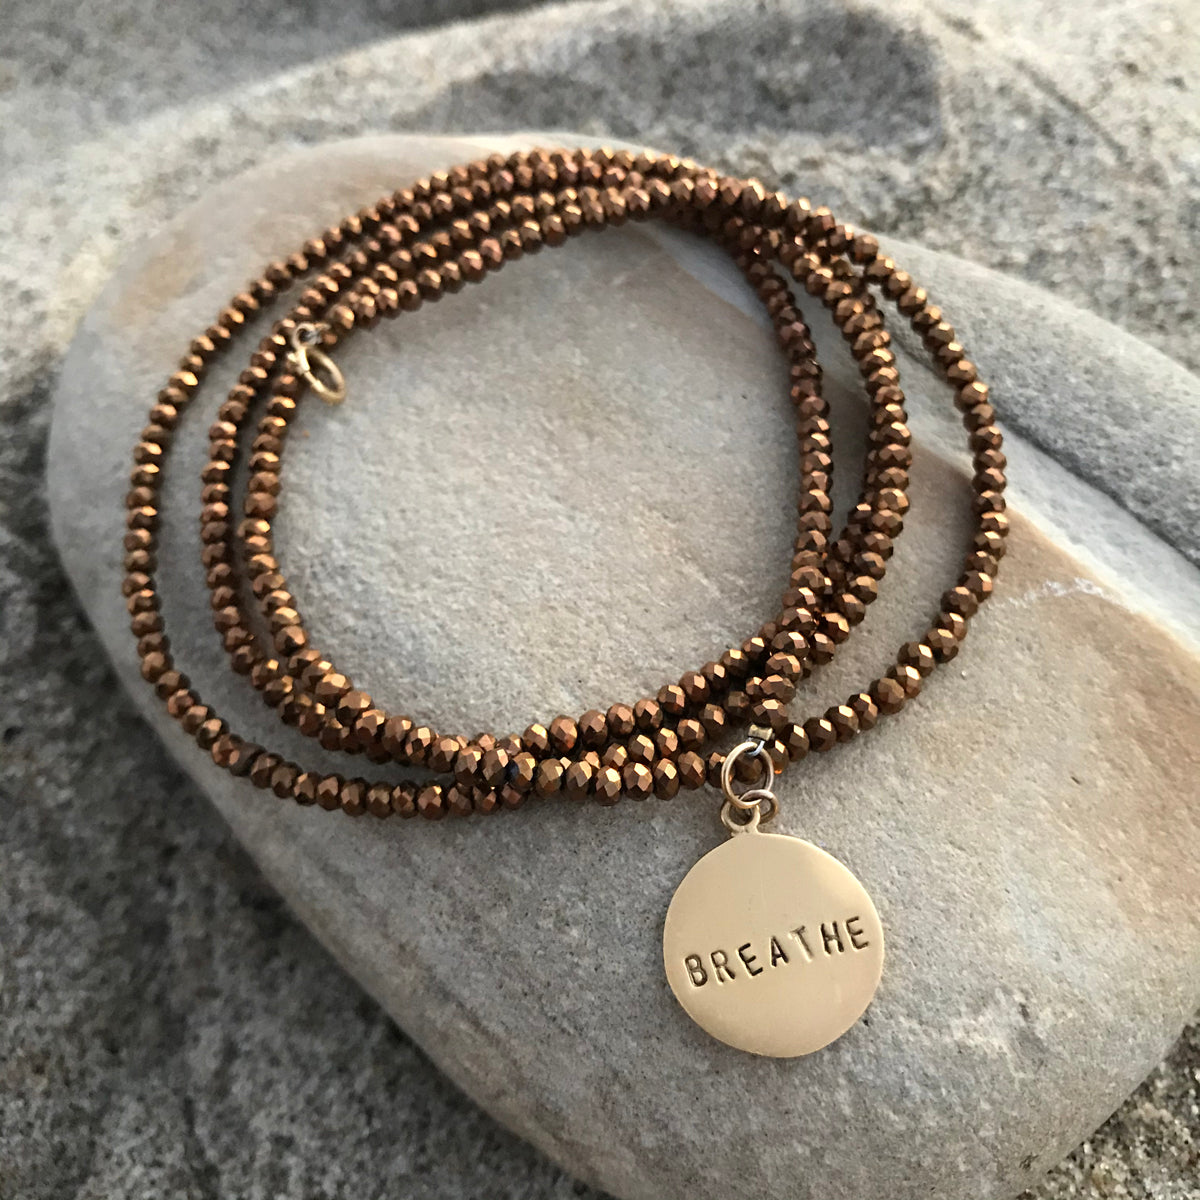 Yoga inspired BREATHE Wrap Bracelet with Bronze Crystals and Gold Filled BREATHE Charm